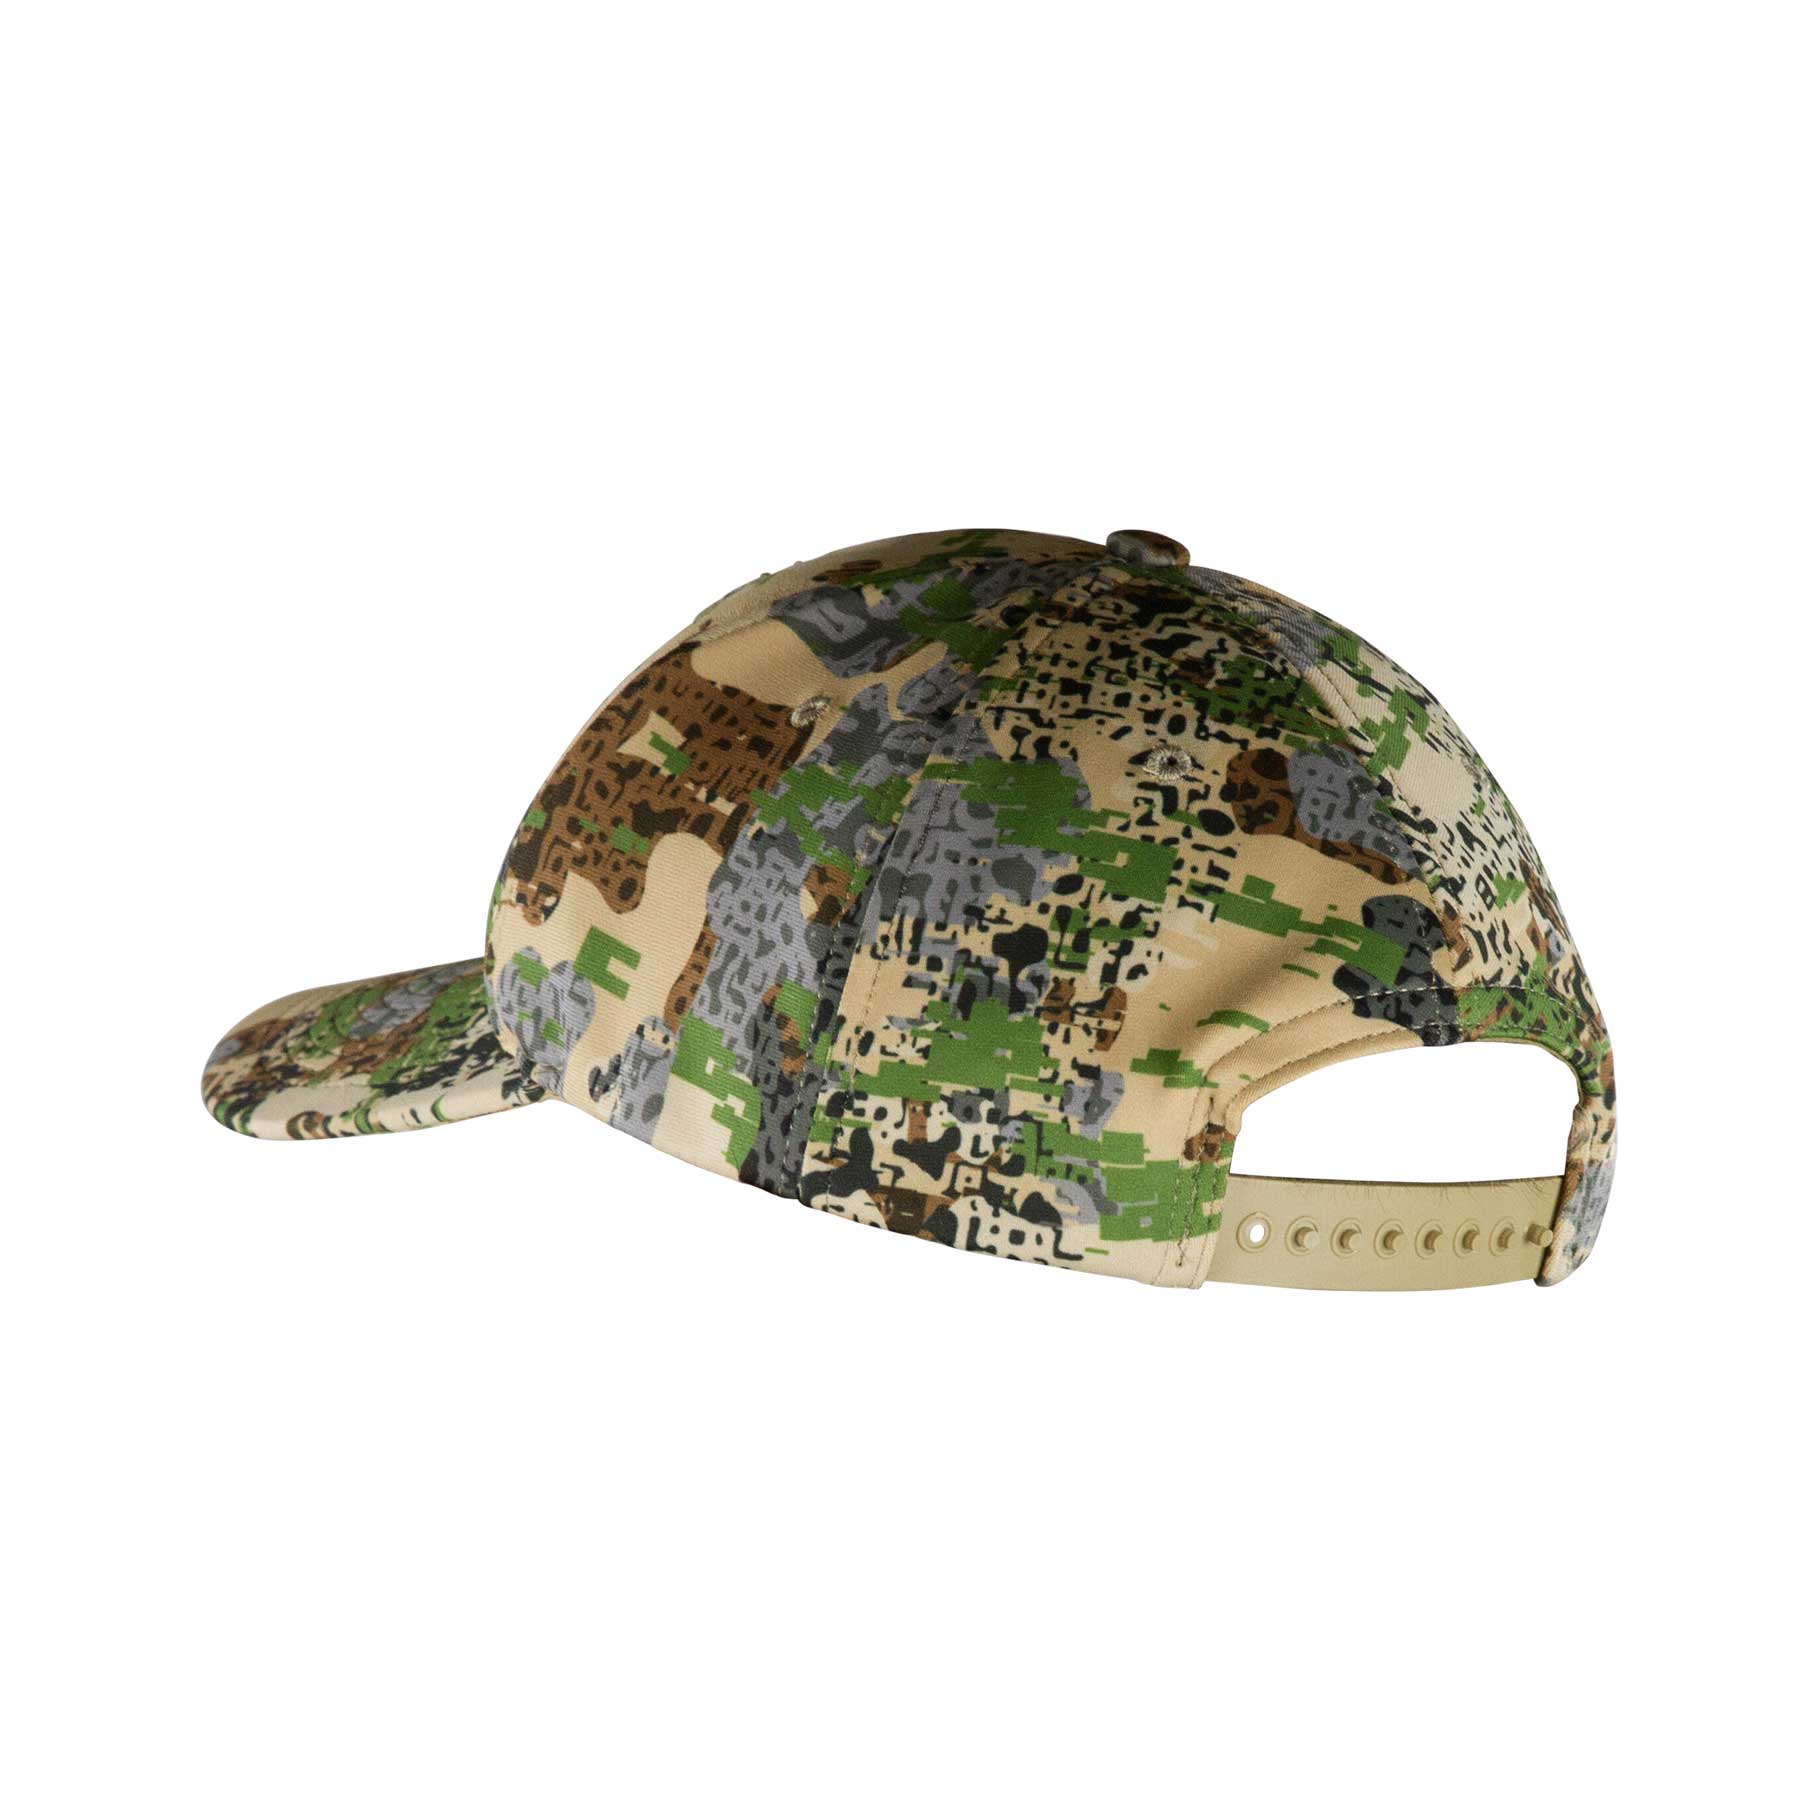 Youth Puff Embroidered Camo All Fabric Cap - FORLOH